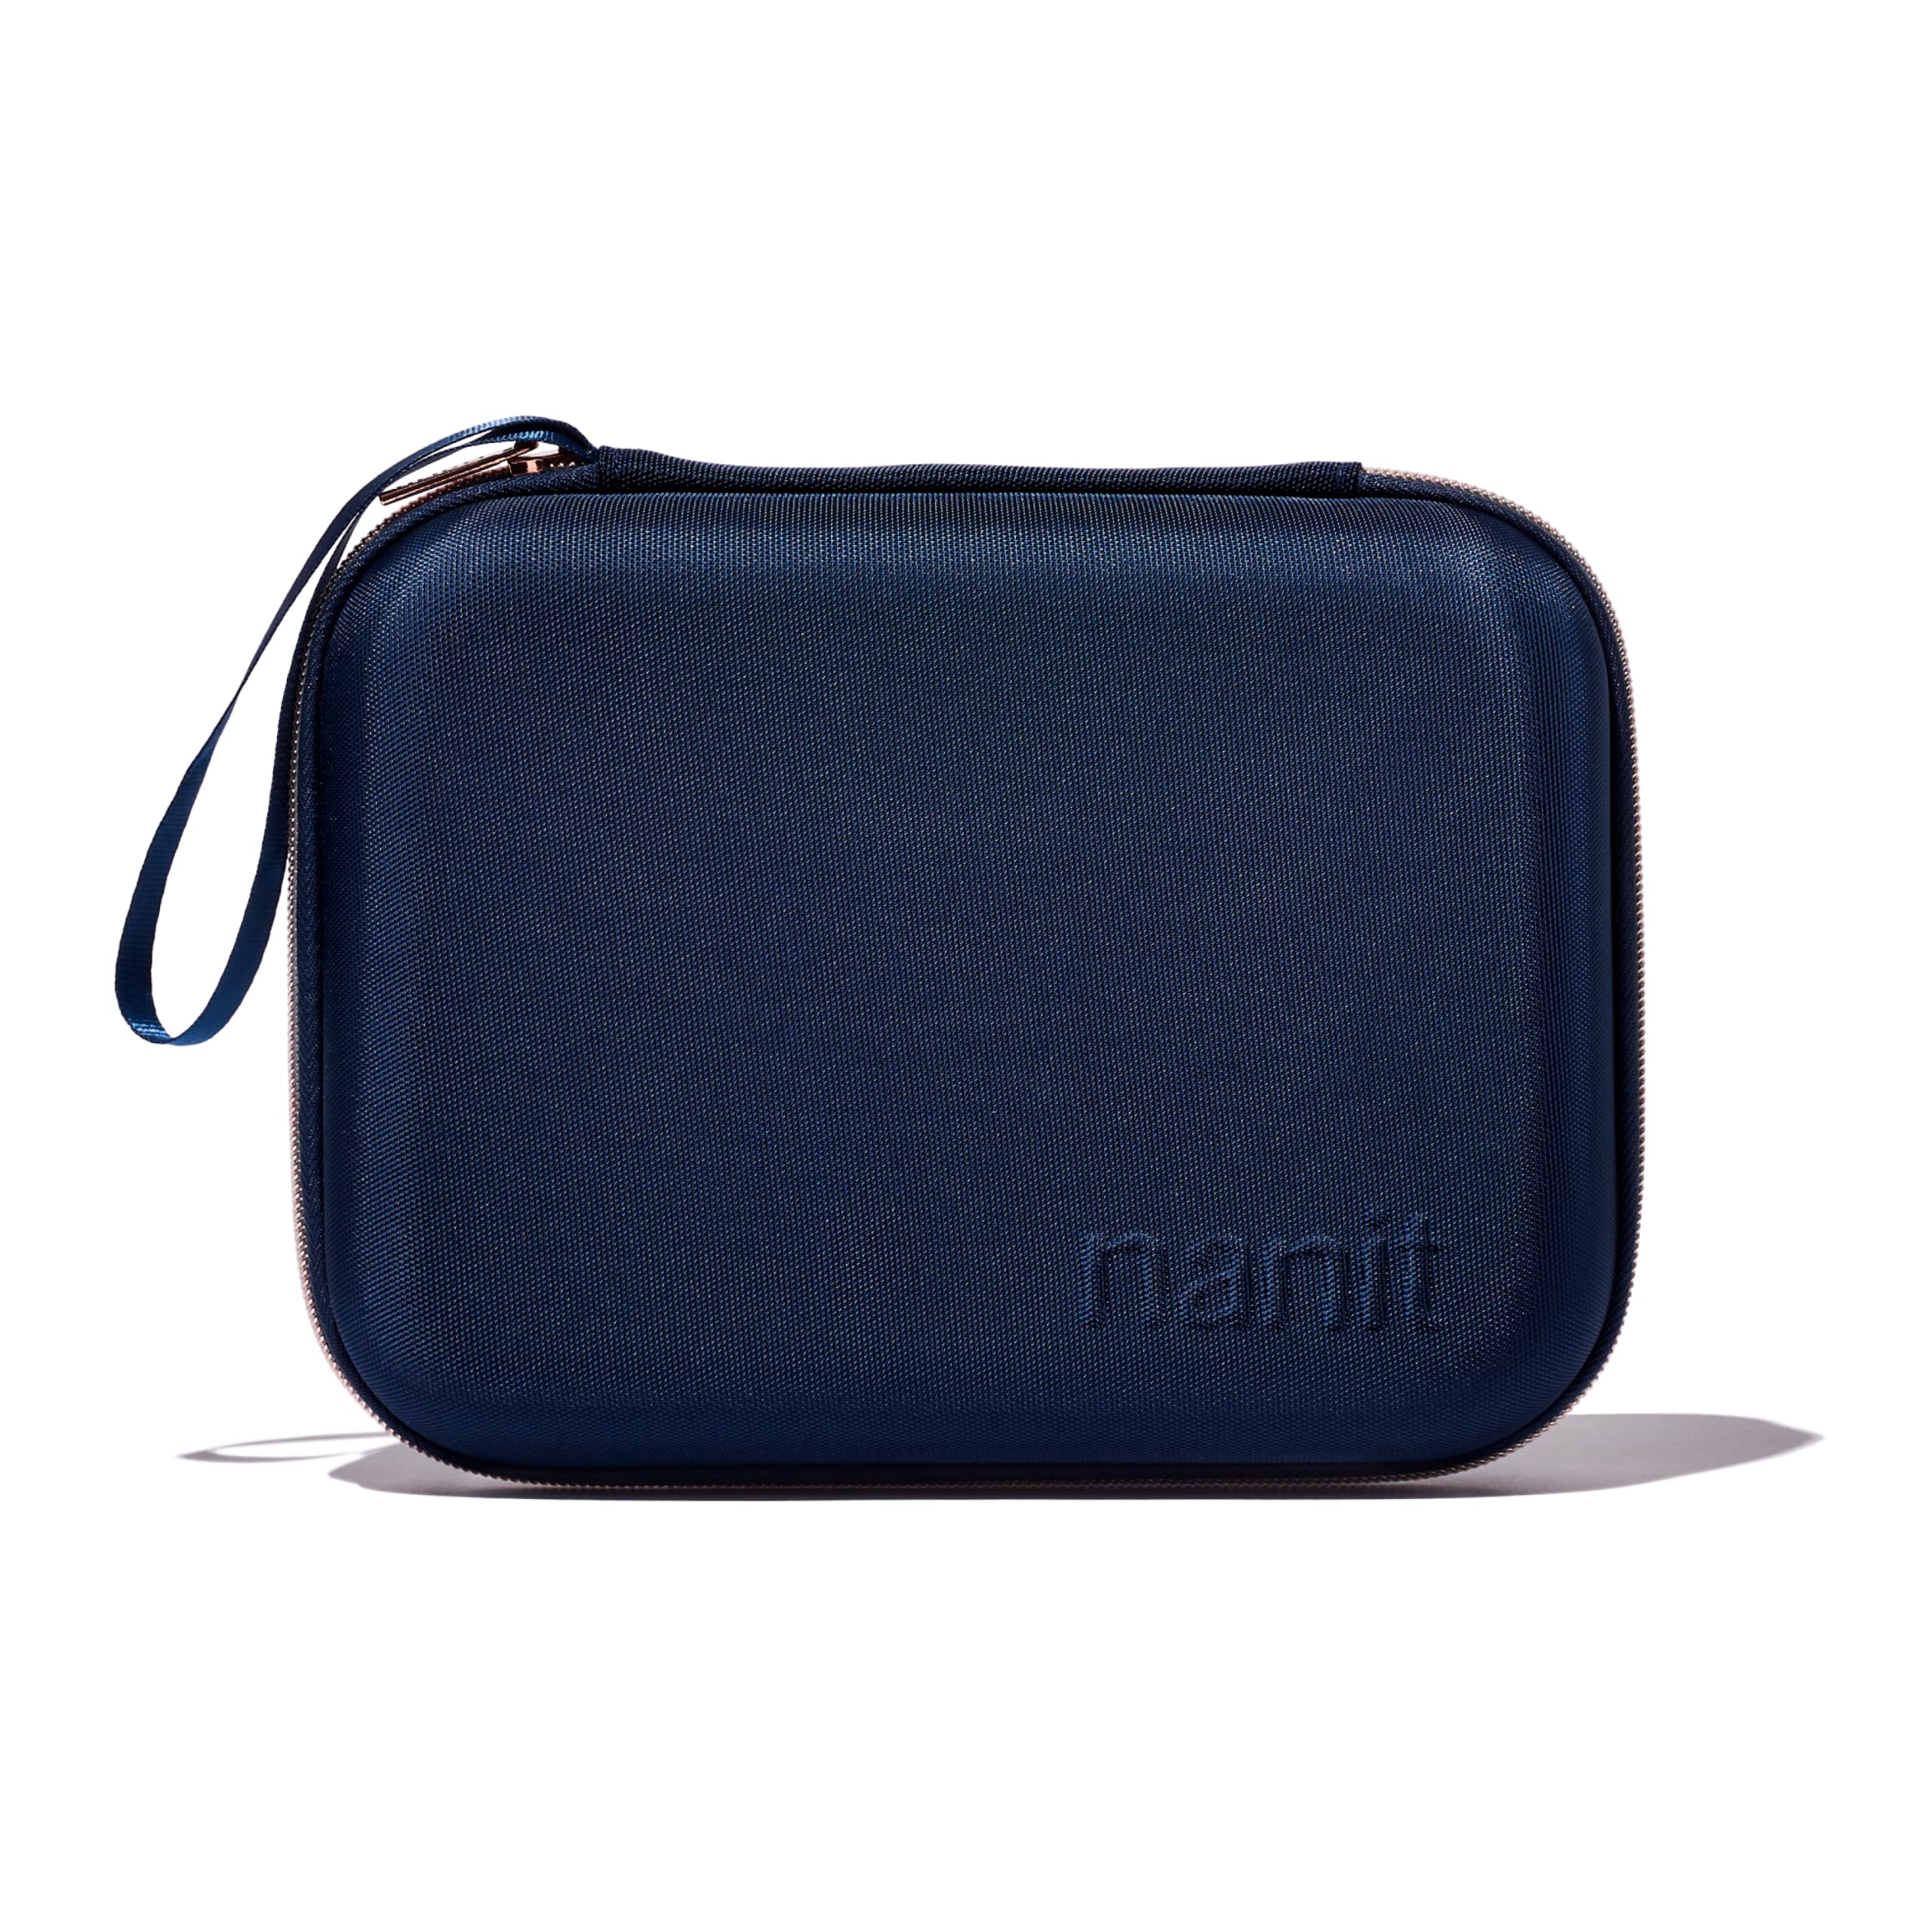 Nanit Travel Case – Protective Hard Shell Carrying Case for Nanit Pro Baby Monitor and Multi-Stand Travel Accessory, Blue